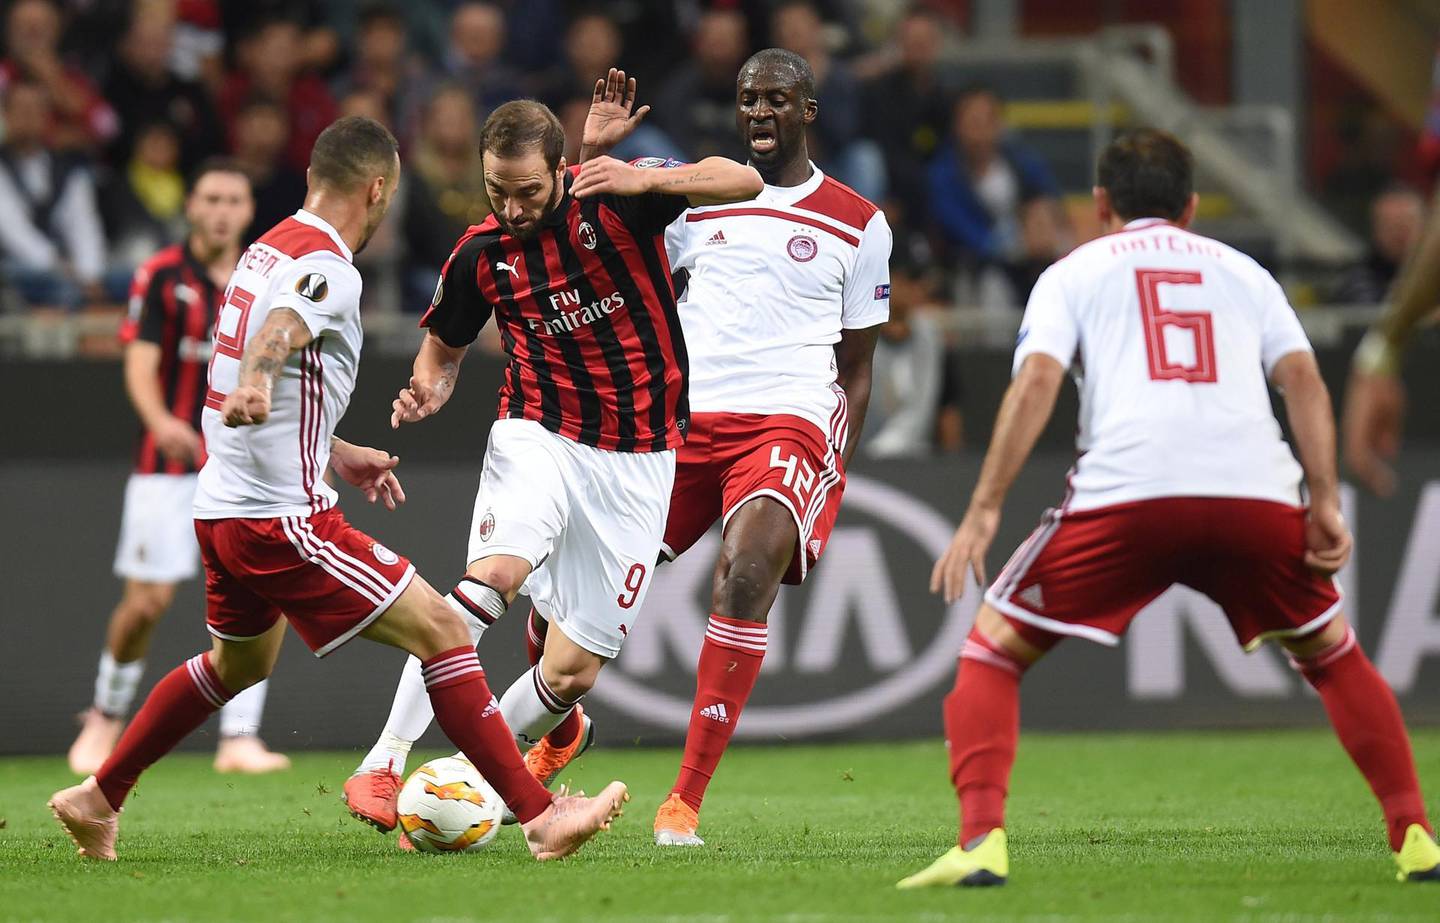 Soccer Football - Europa League - Group Stage - Group F - AC Milan v Olympiacos - San Siro, Milan, Italy - October 4, 2018  AC Milan's Gonzalo Higuain in action with Olympiacos' Yaya Toure    REUTERS/Daniele Mascolo